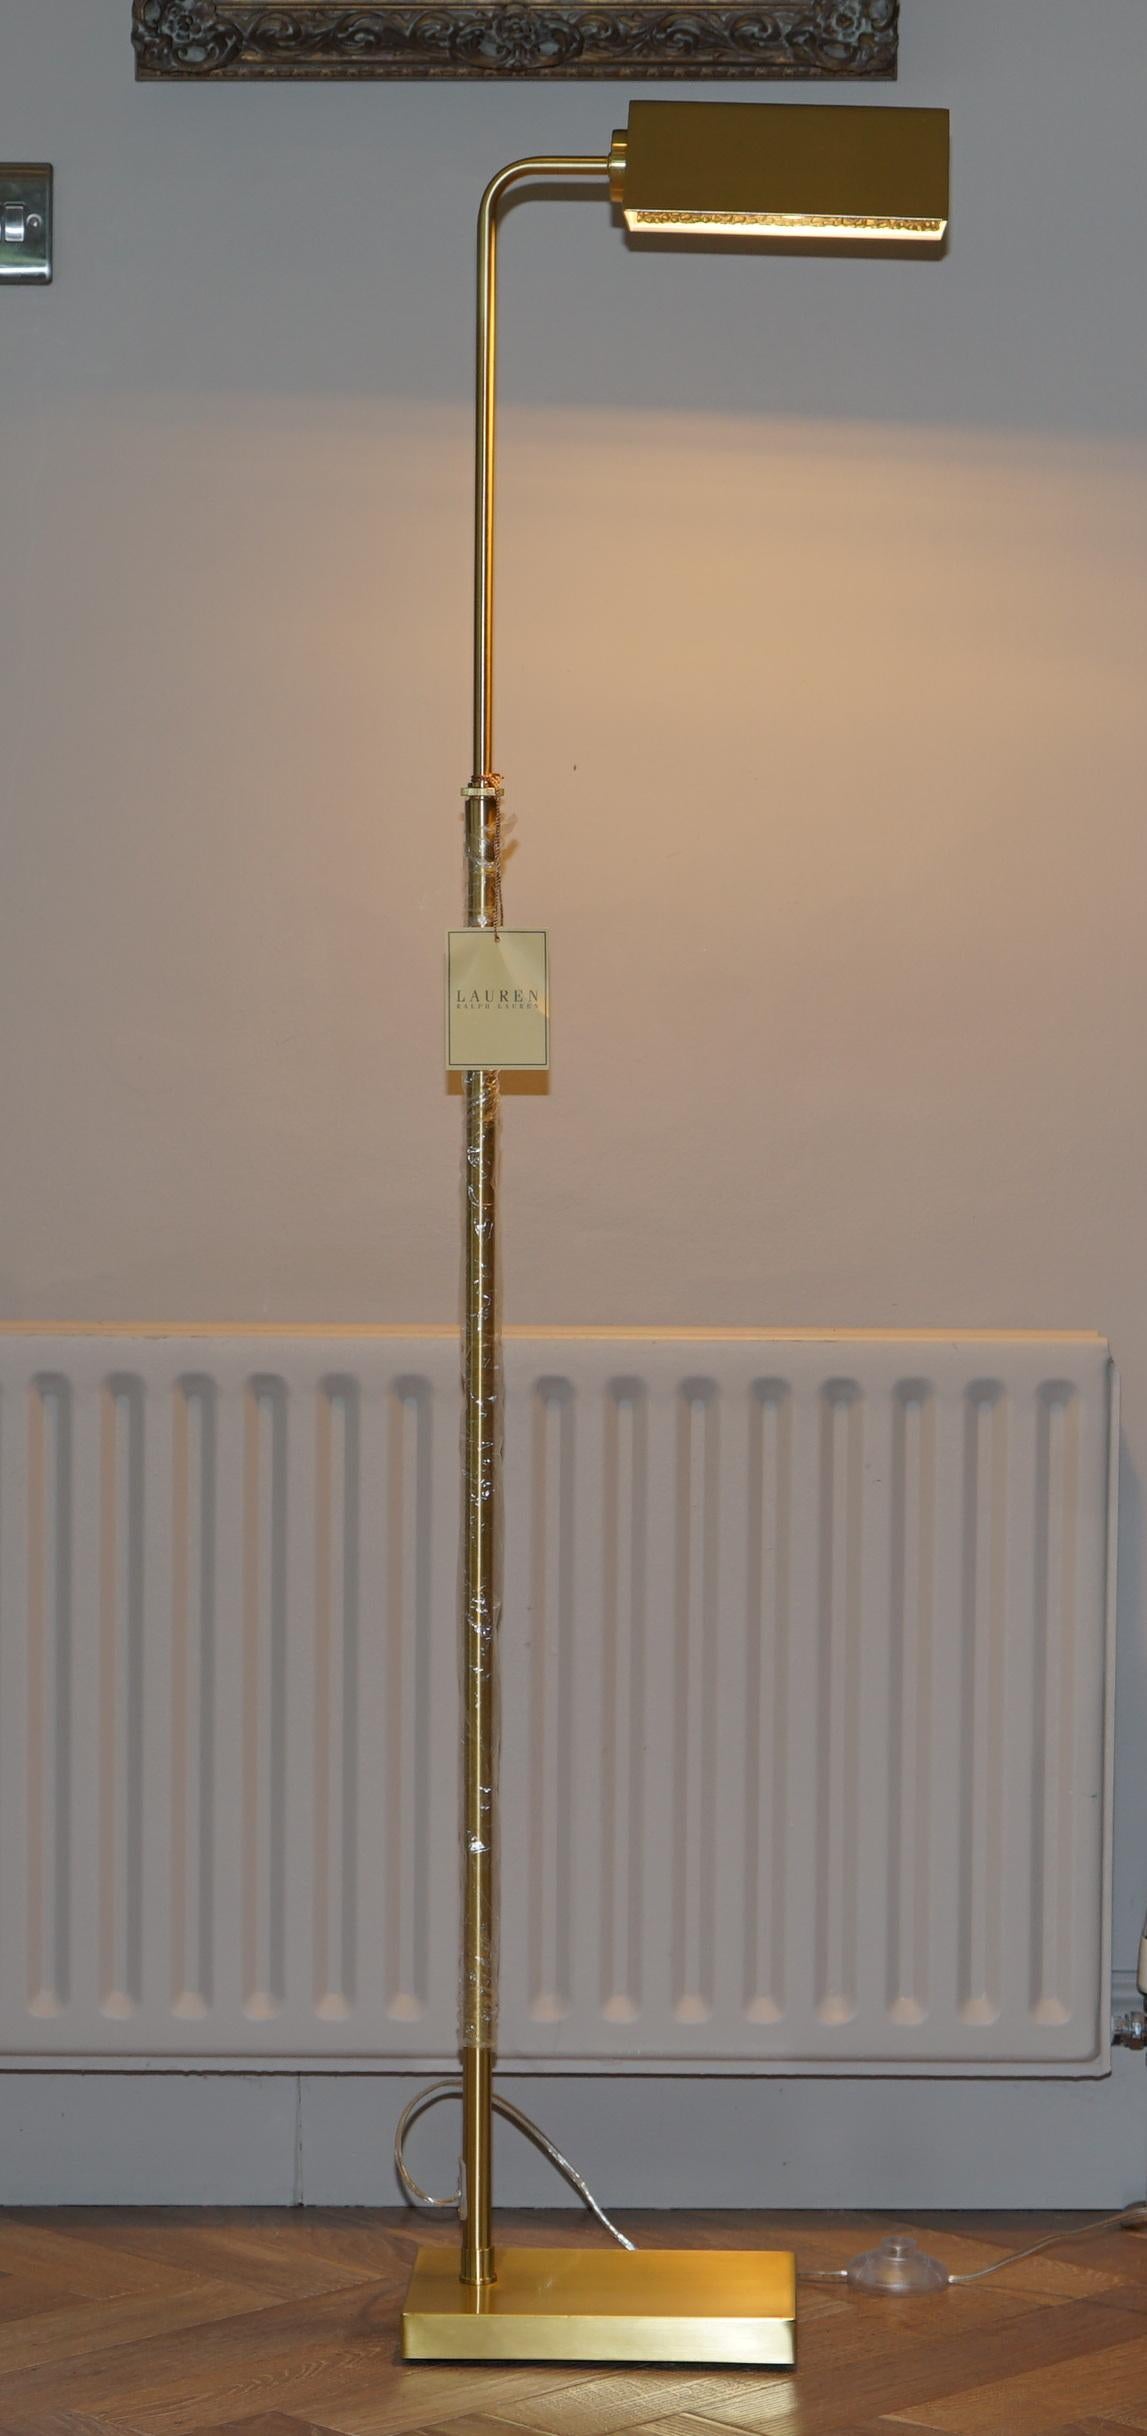 I am delighted to offer for sale this brand new in the original box Ralph Lauren brass finish floor standing lamp in the Art Deco Bankers style 

I have a number of brand new Ralph Lauren rugs and lamps in stock plus various Tommy Hilfiger bedding